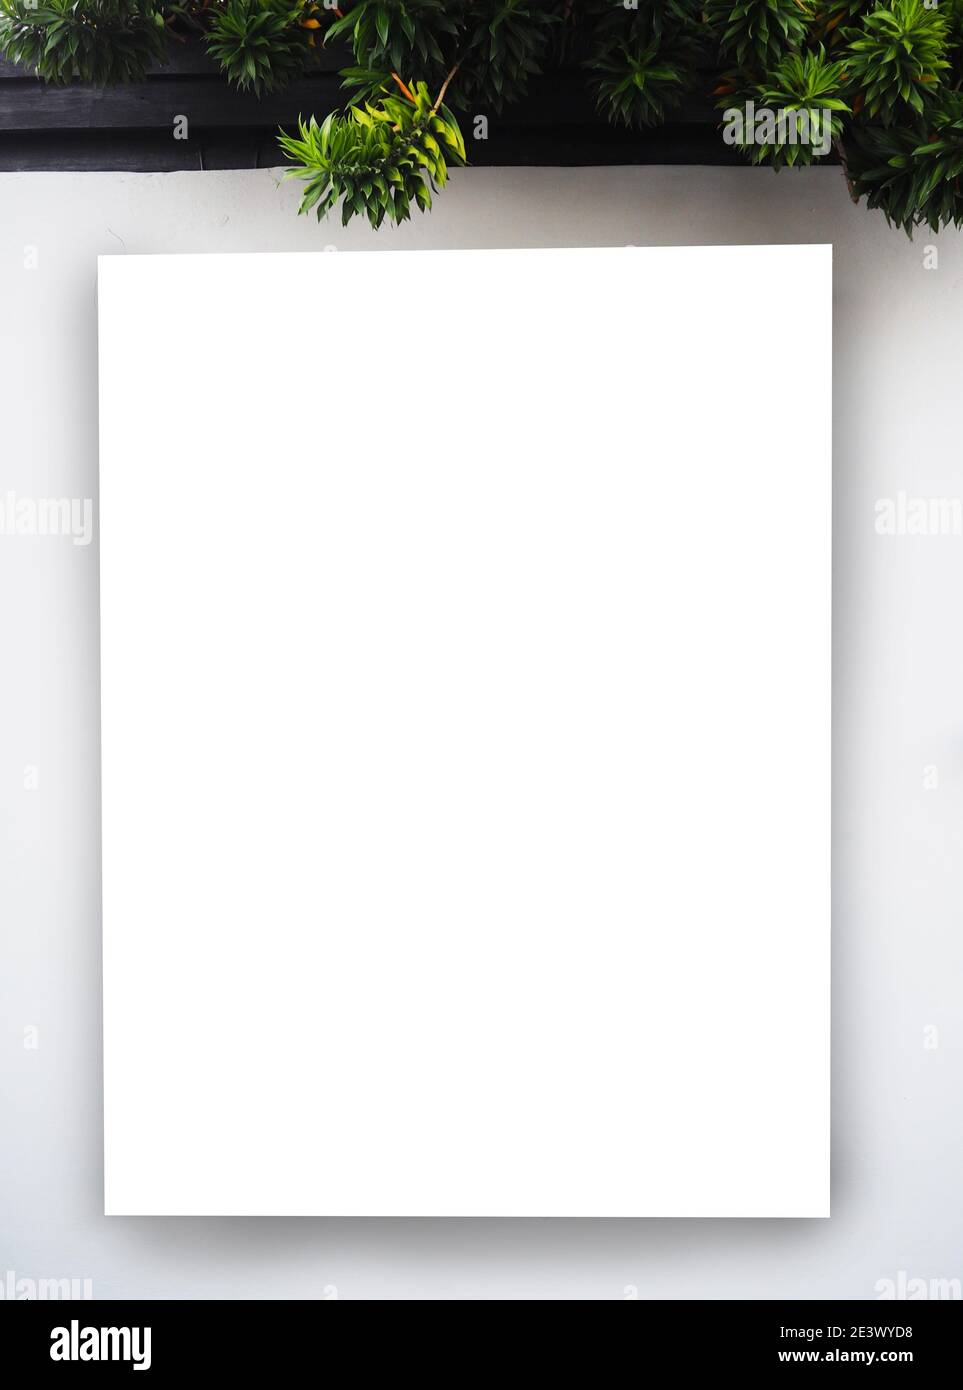 Blank frame billboard mockup on grey concrete wall background. space for text or design Stock Photo